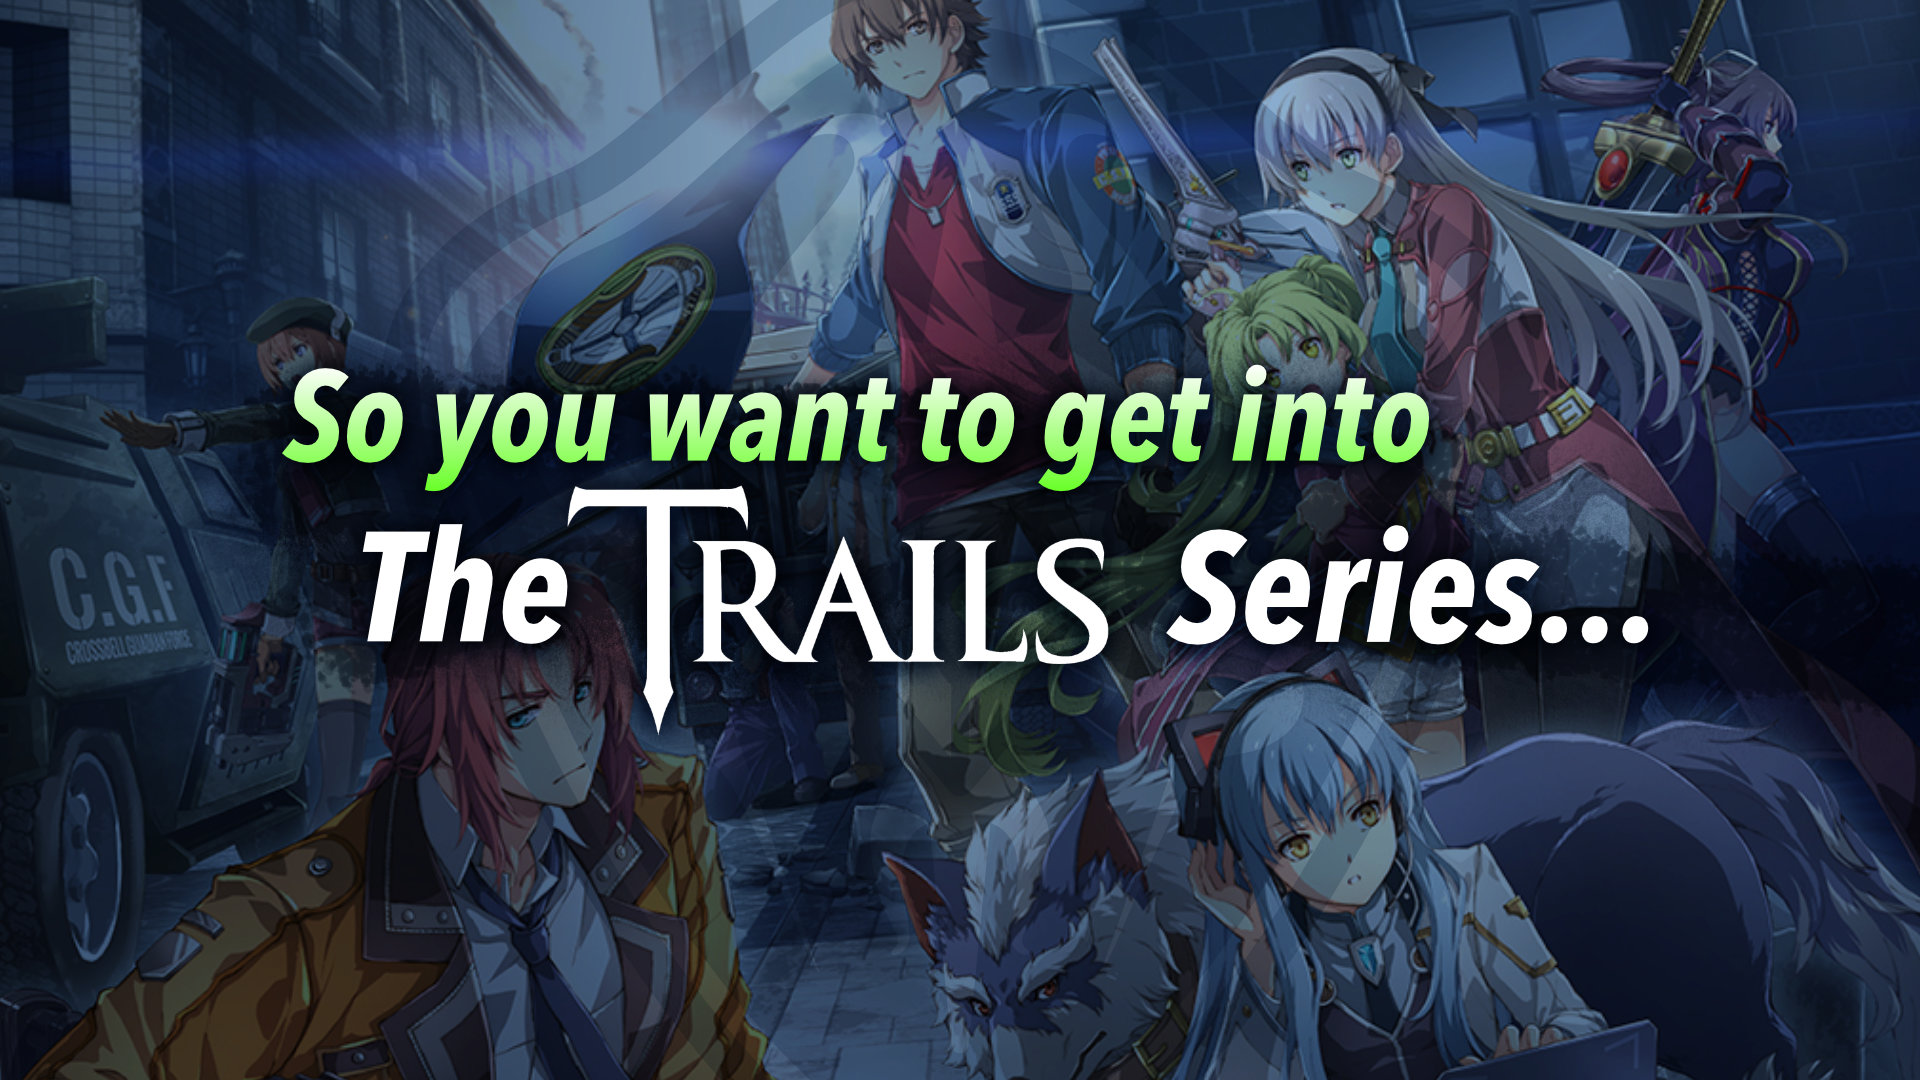 So you want to get into the Trails Series